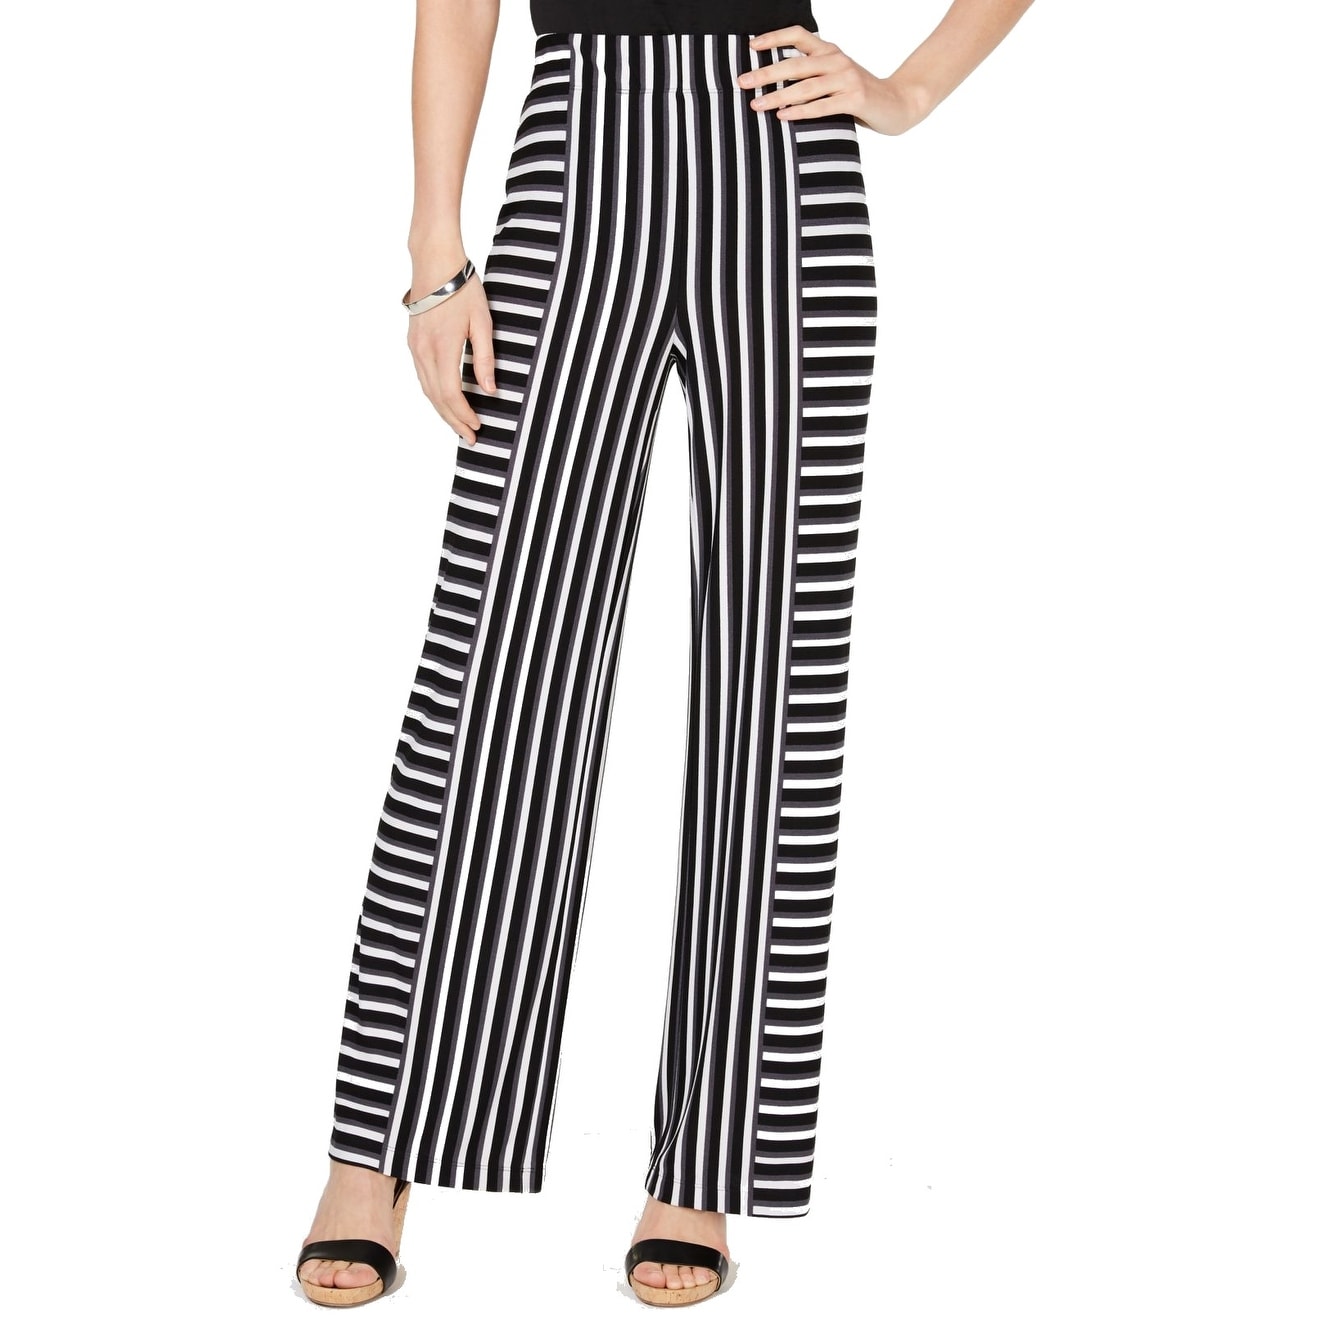 inc black and white striped pants